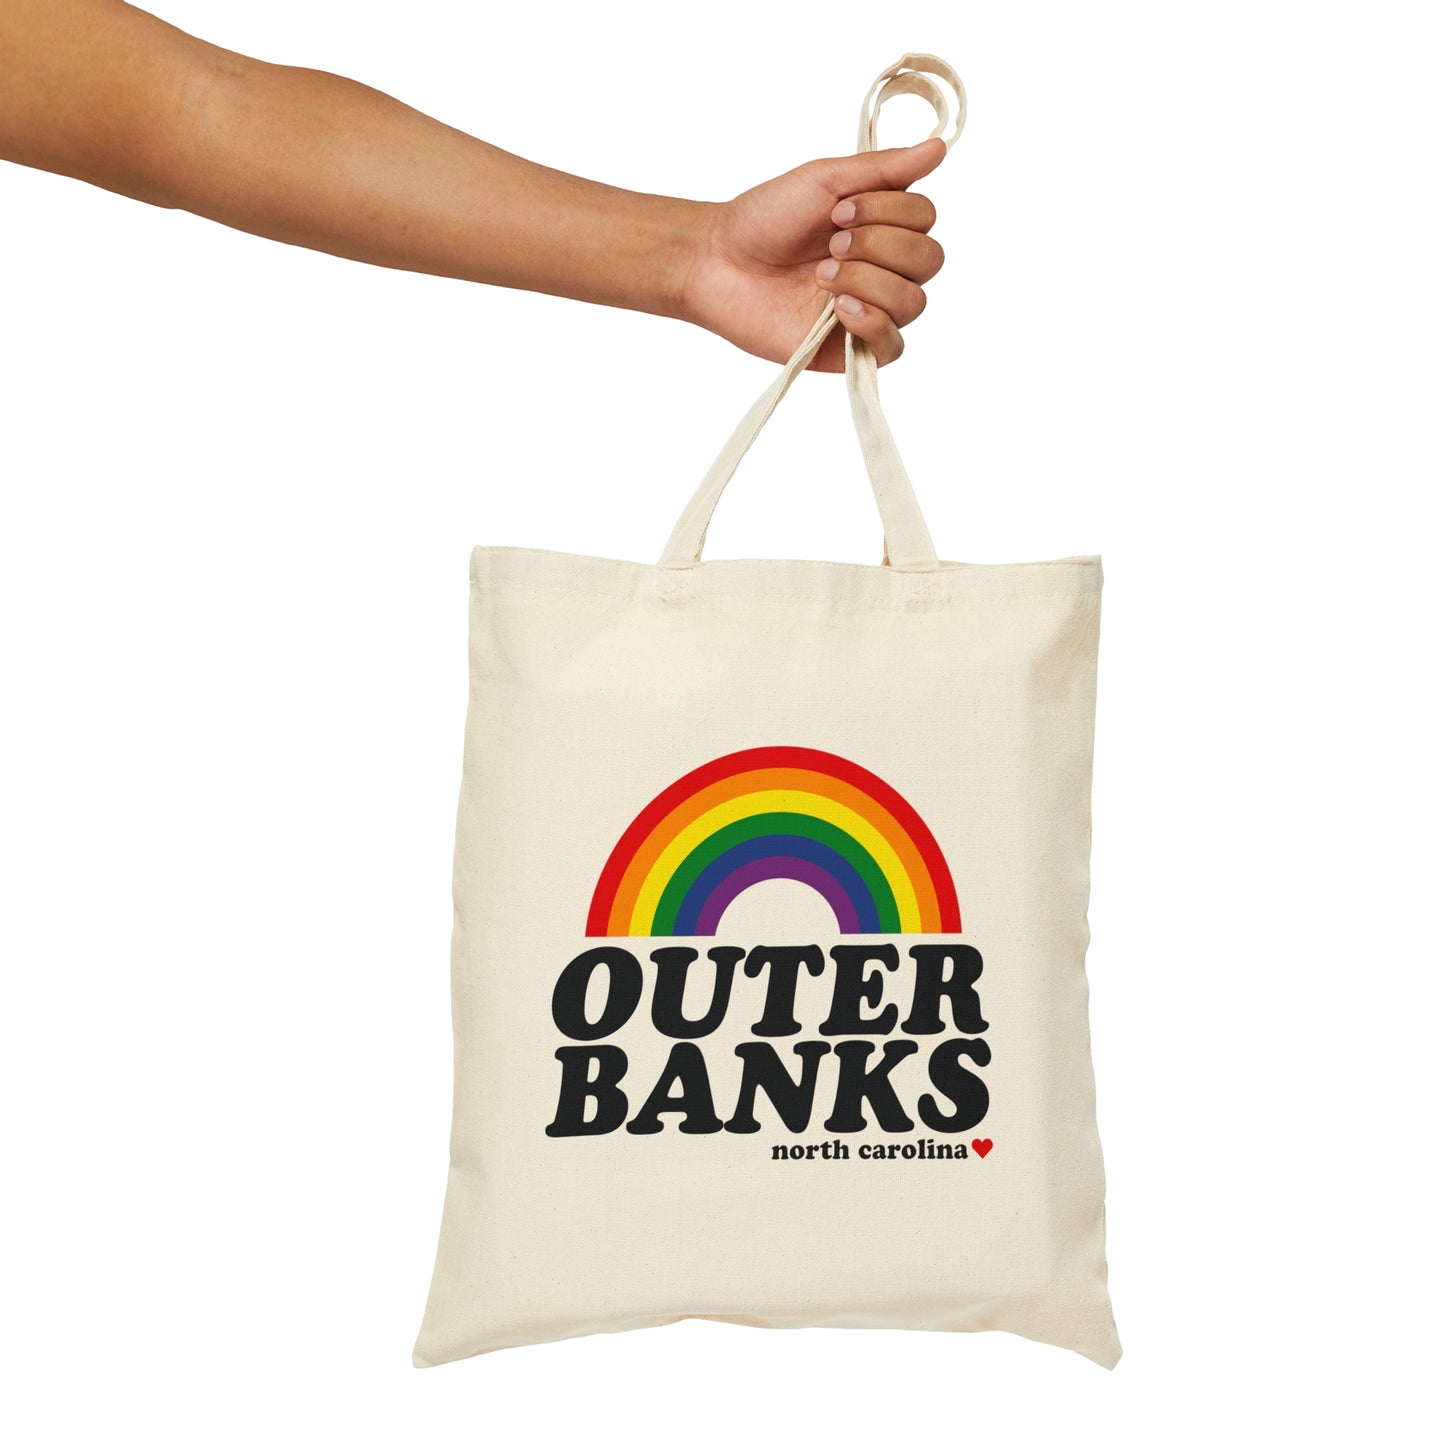 Outer Banks Rainbow Tote